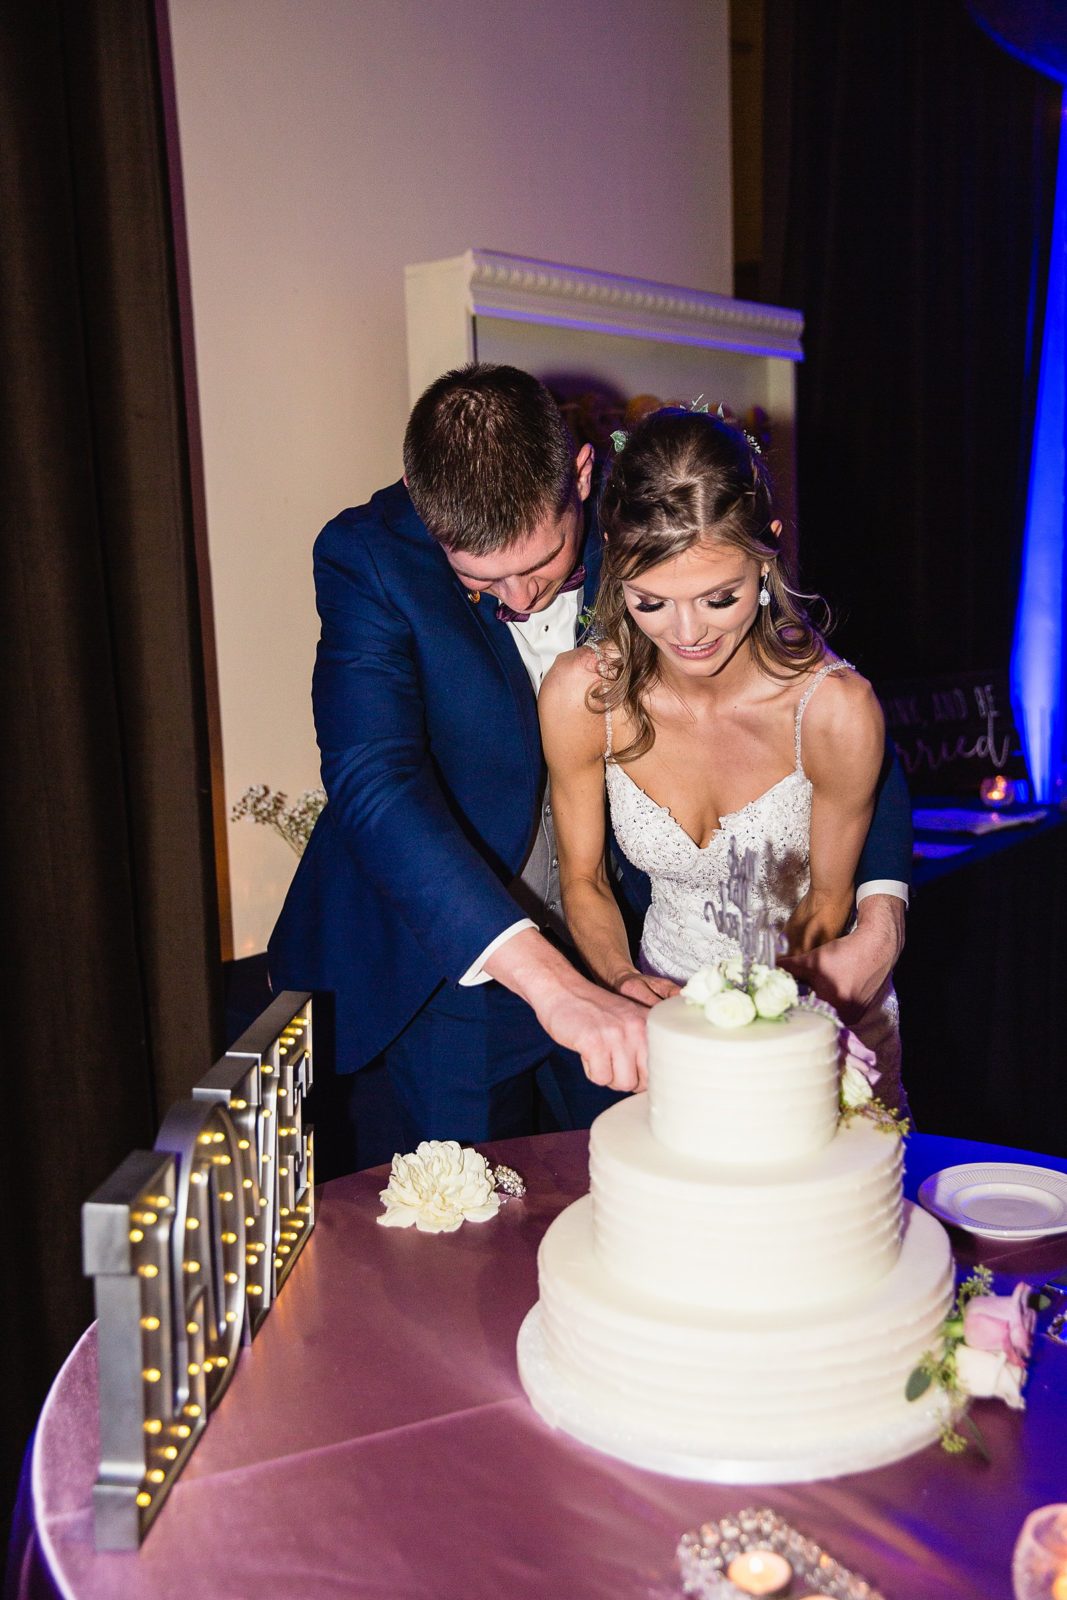 Bride and Groom cutting their wedding cake at their Superstition Manor wedding reception by Arizona wedding photographer PMA Photography.